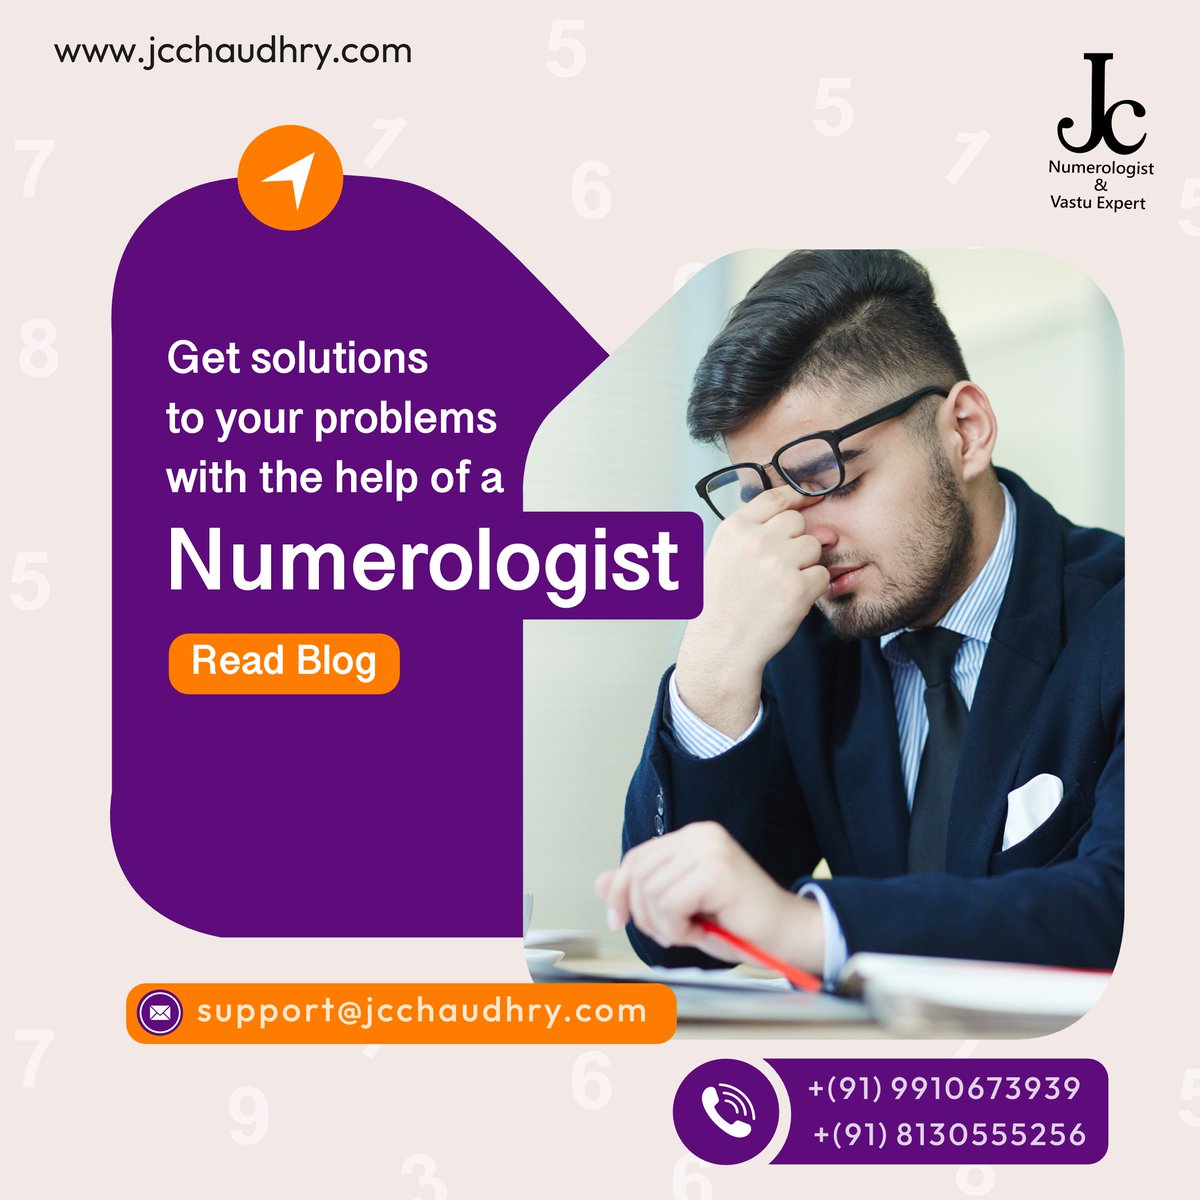 Looking for a numerologist near you? Your search ends here! Read the blog to know the best numerologist to contact near you and why?
.
jcchaudhry.com/article/get-yo…

#jcchaudhry #numerologist #bestnumerologist #nearme #numerology #numerologybenefits #chaudhrynummero